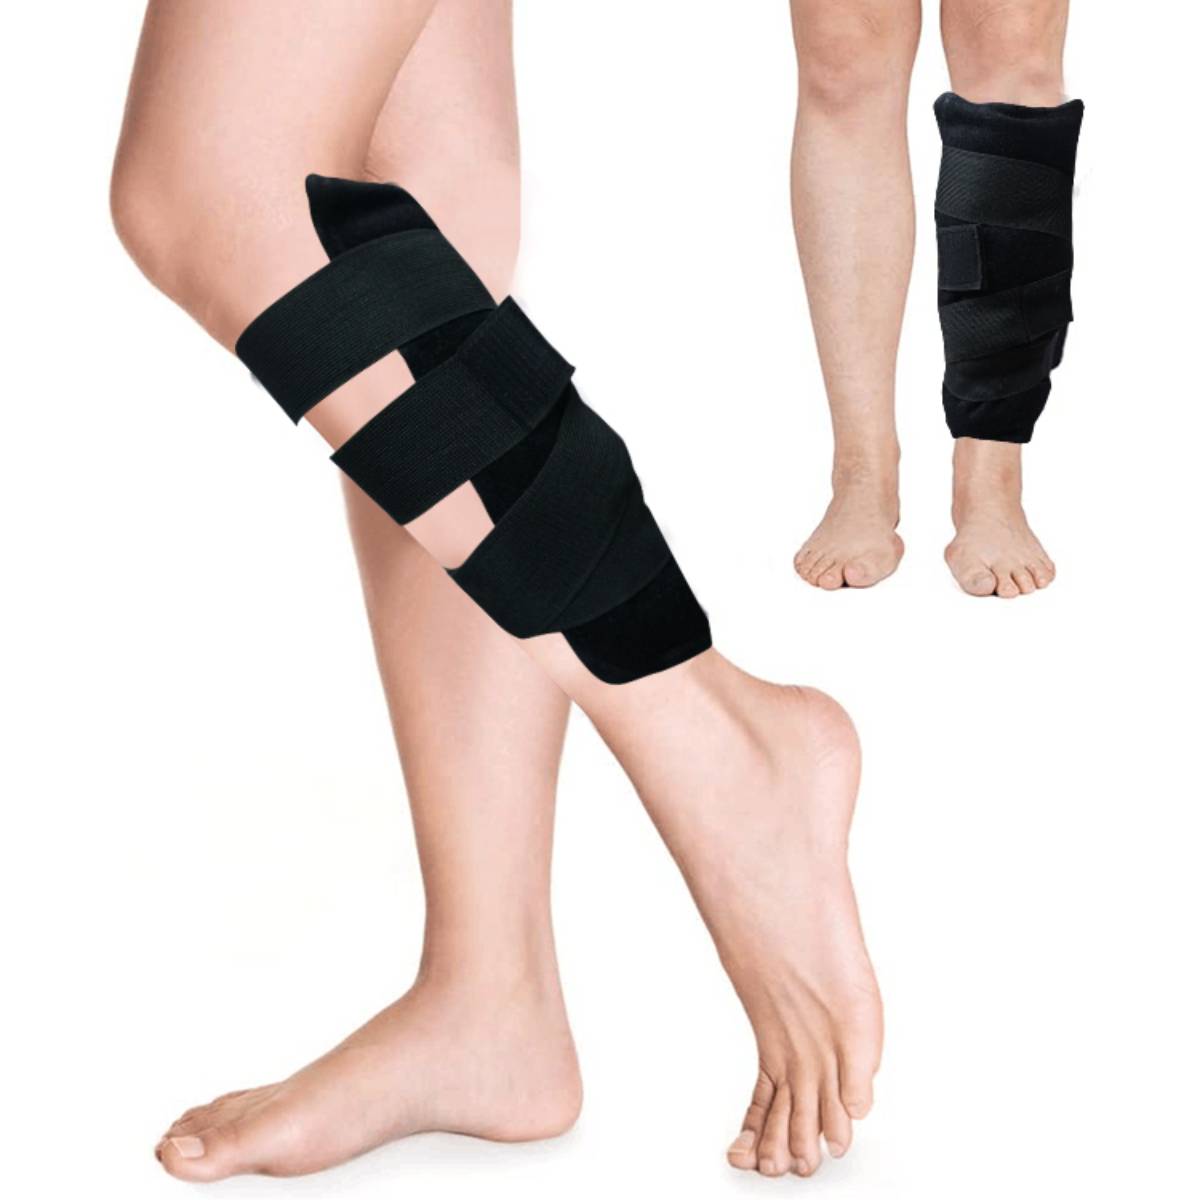 Cold Ice Pack for leg Injuries Recovery